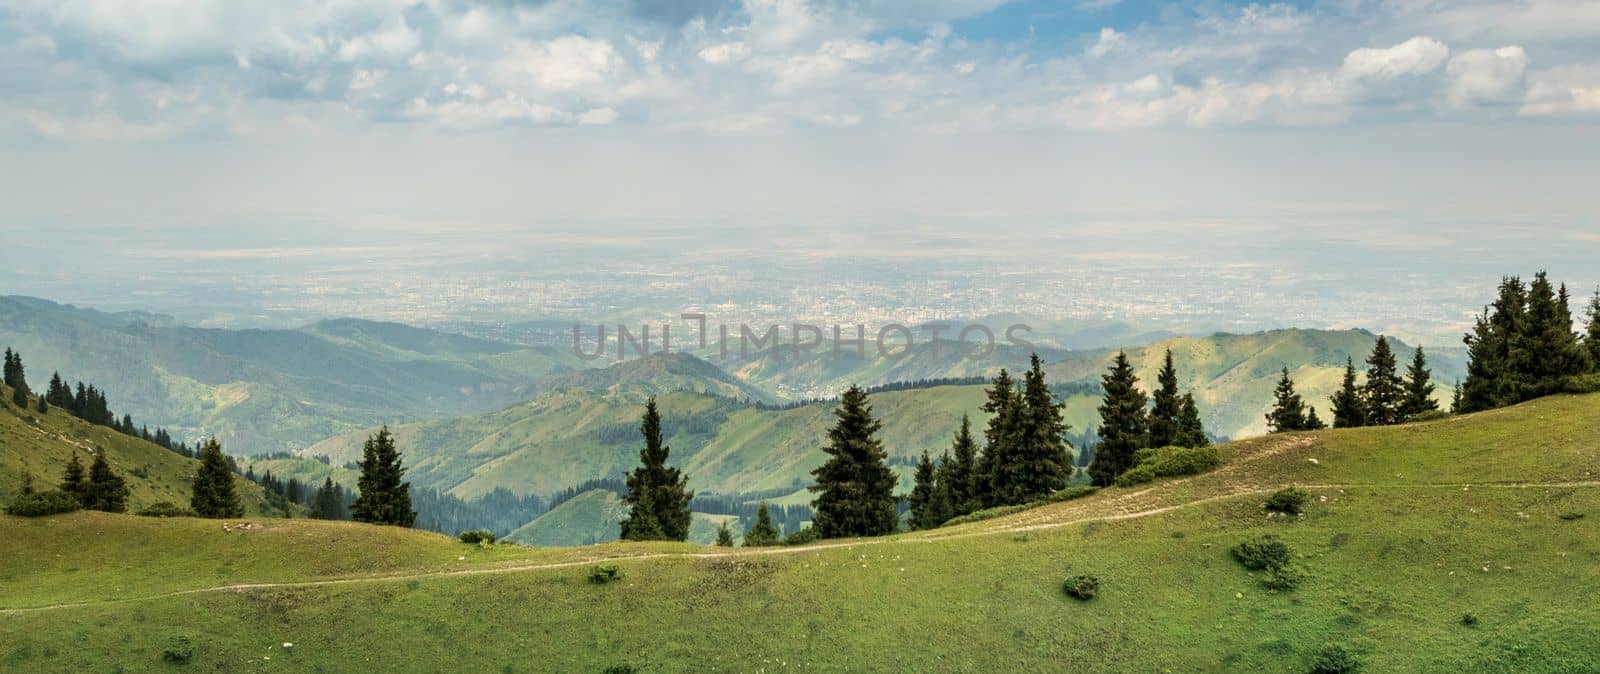 Panoramic view of the city of Almaty from the tops of the Almaty mountains. Tourist natural places of Kazakhstan, copy space by Rom4ek